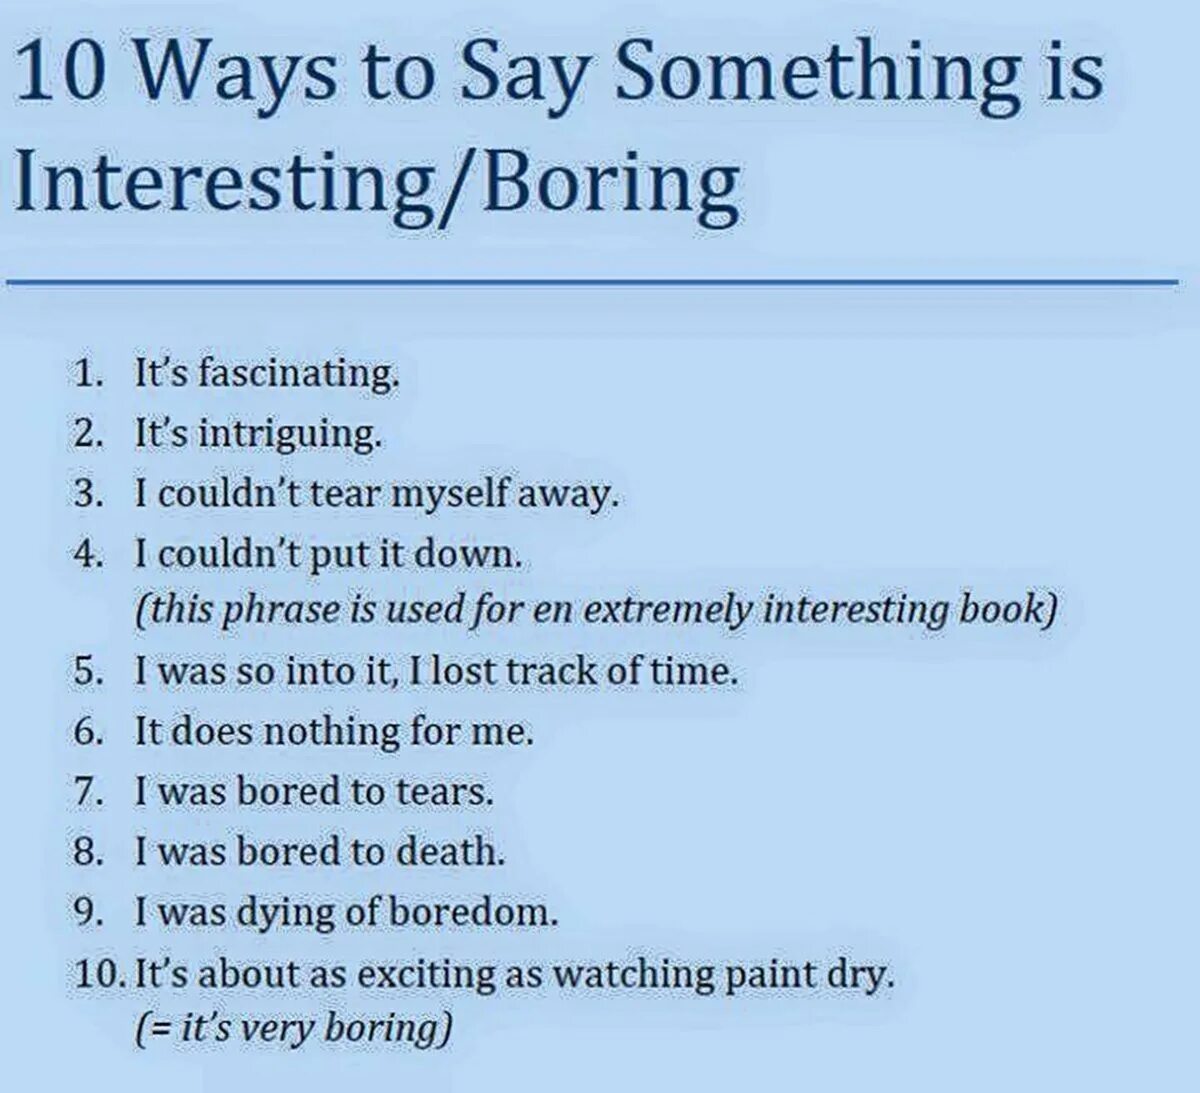 Interested время. Other ways to say interesting. Other ways to say. Interesting phrases in English. Other ways to say say.